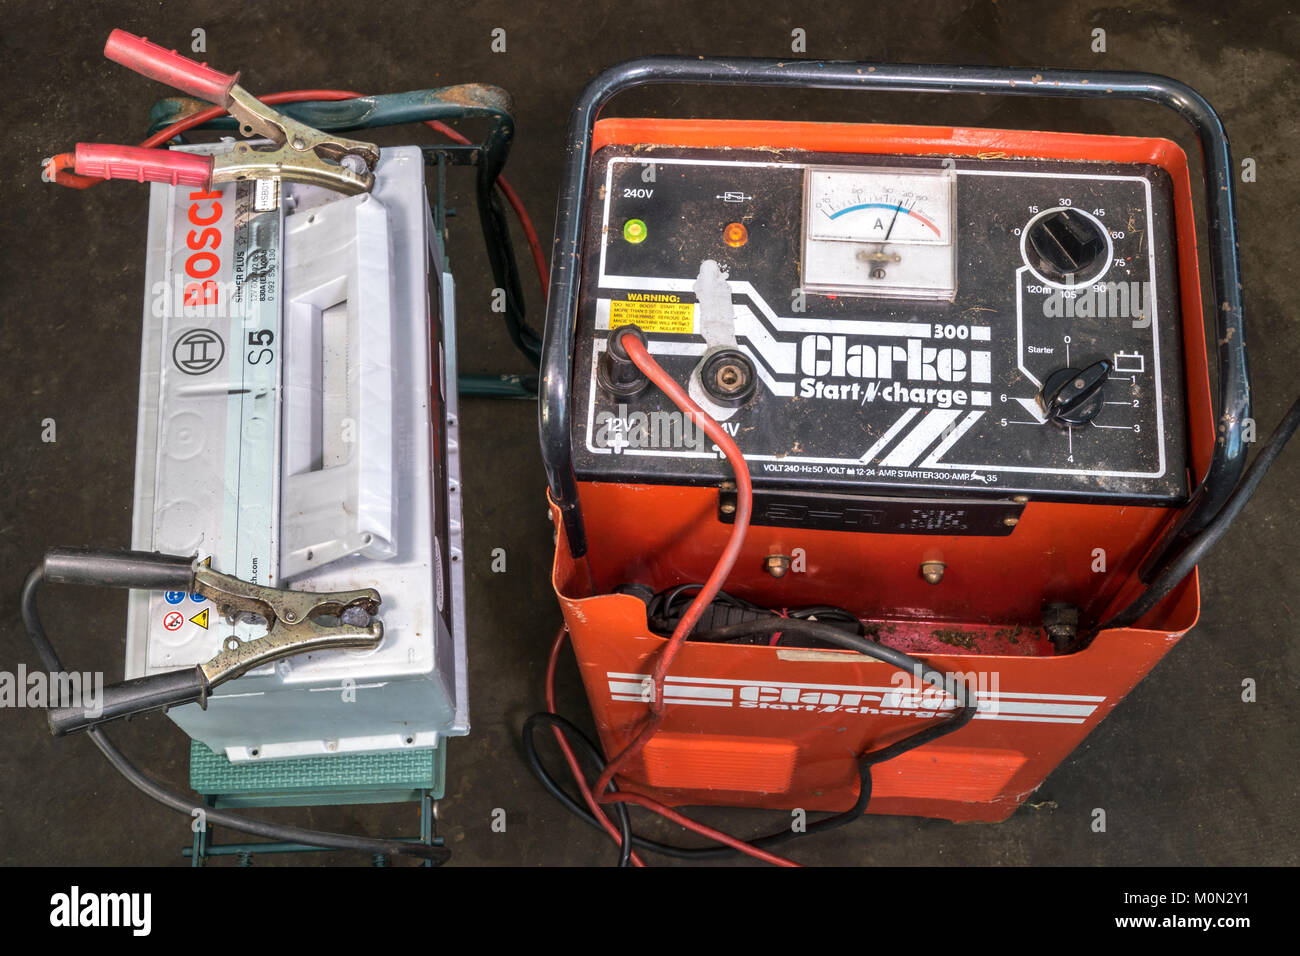 On charge: a flat 12 volt car battery connected to, and receiving a charge from, an industrial, heavy duty, Clarke garage charger. England, UK. Stock Photo